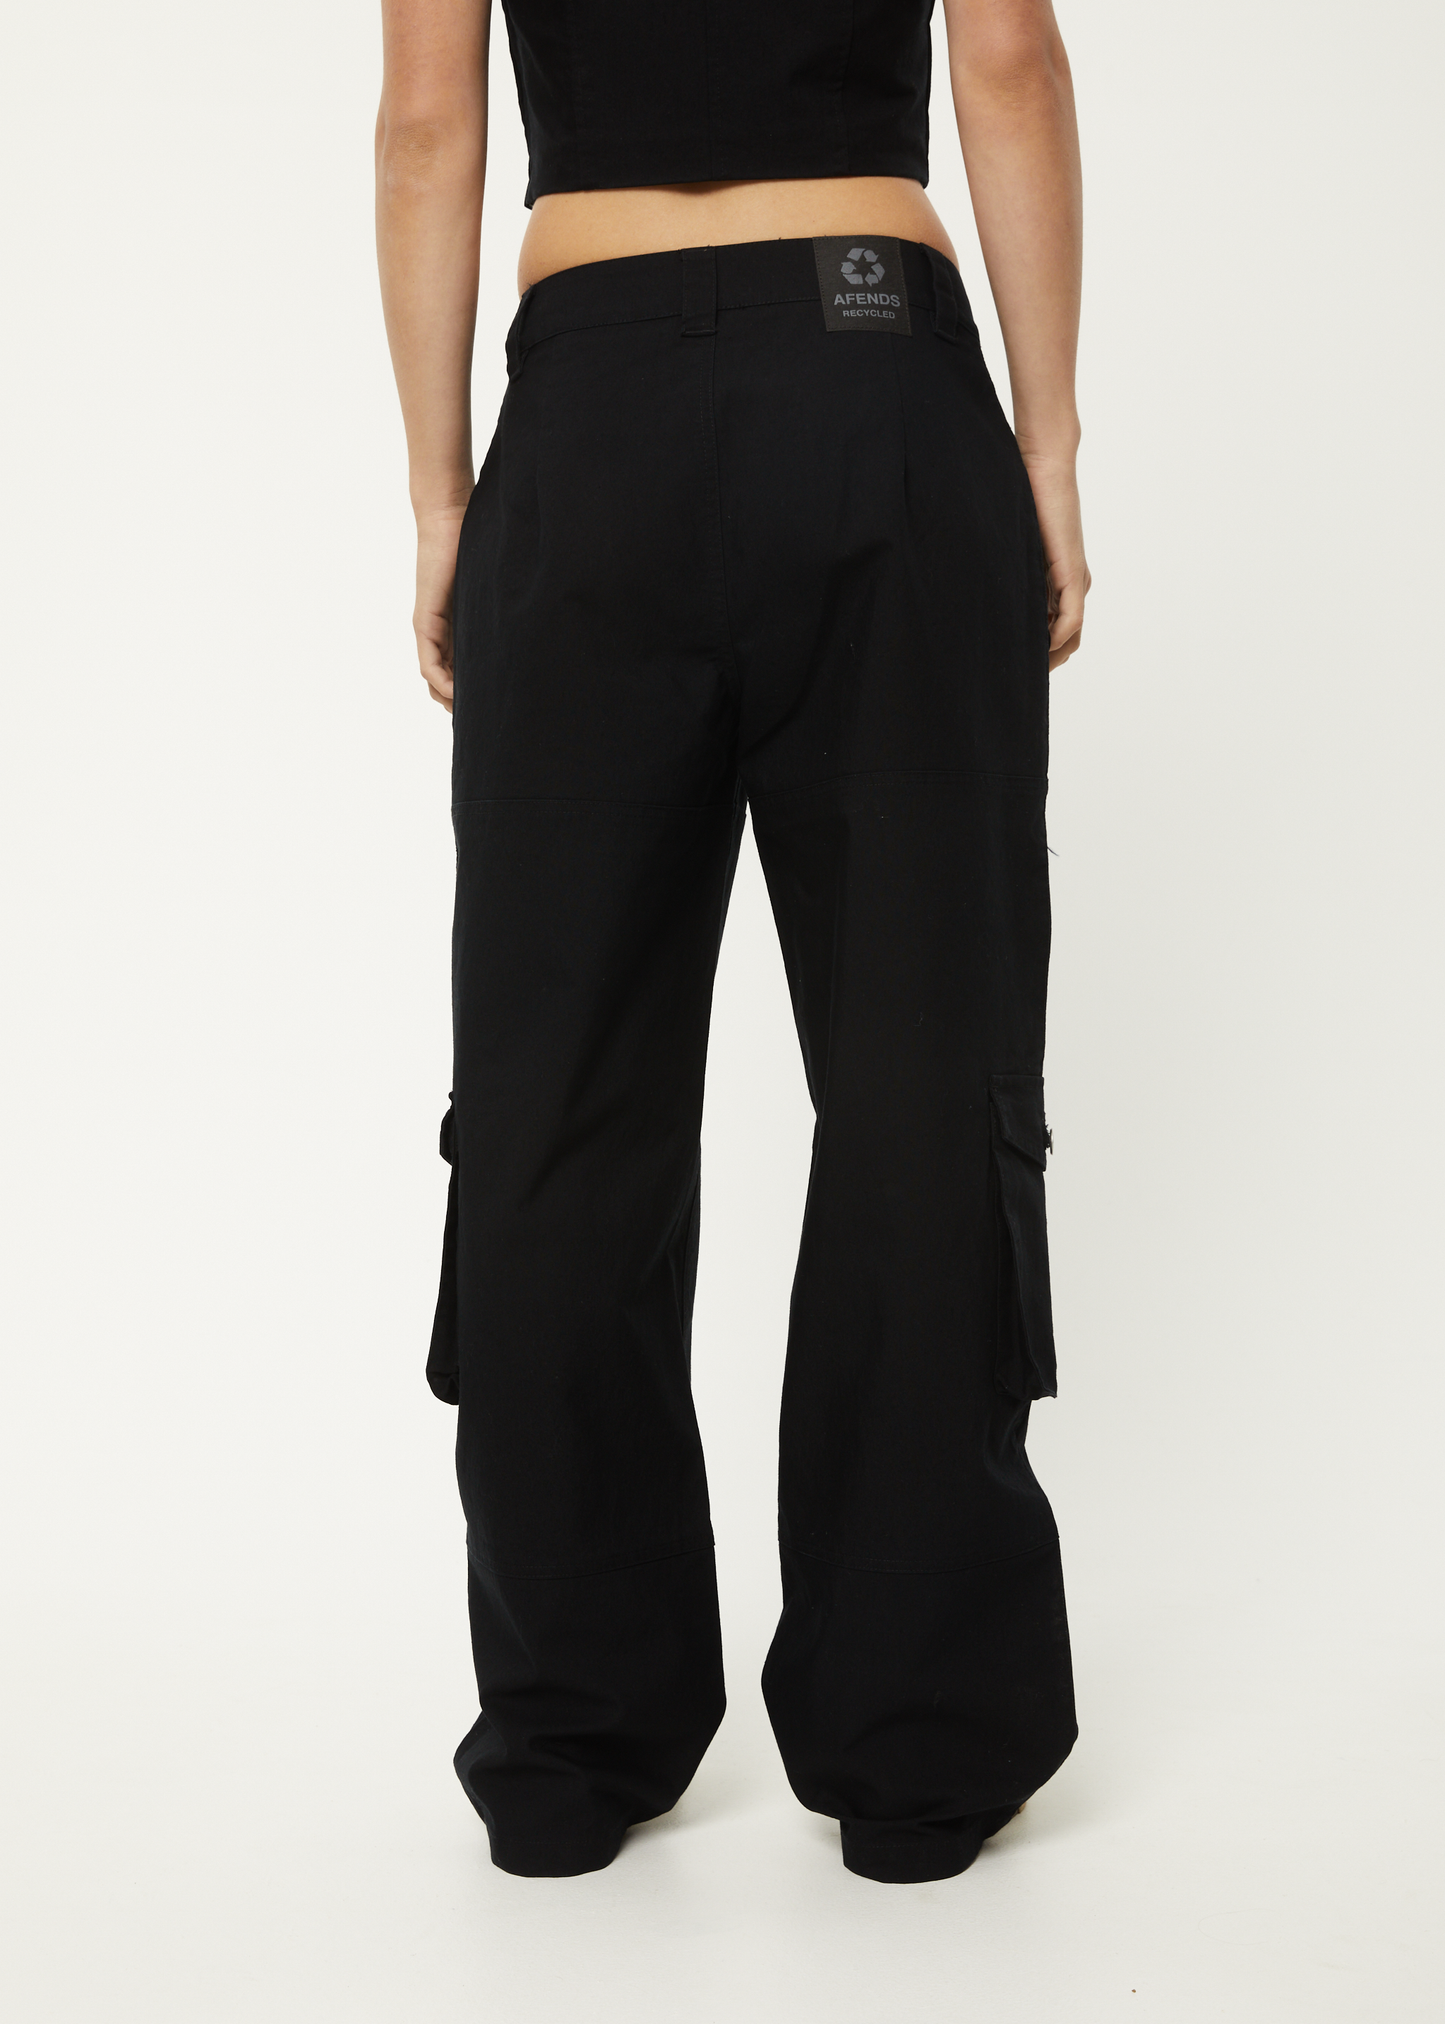 Afends Womens Linger - Recycled Cargo Pants - Black 